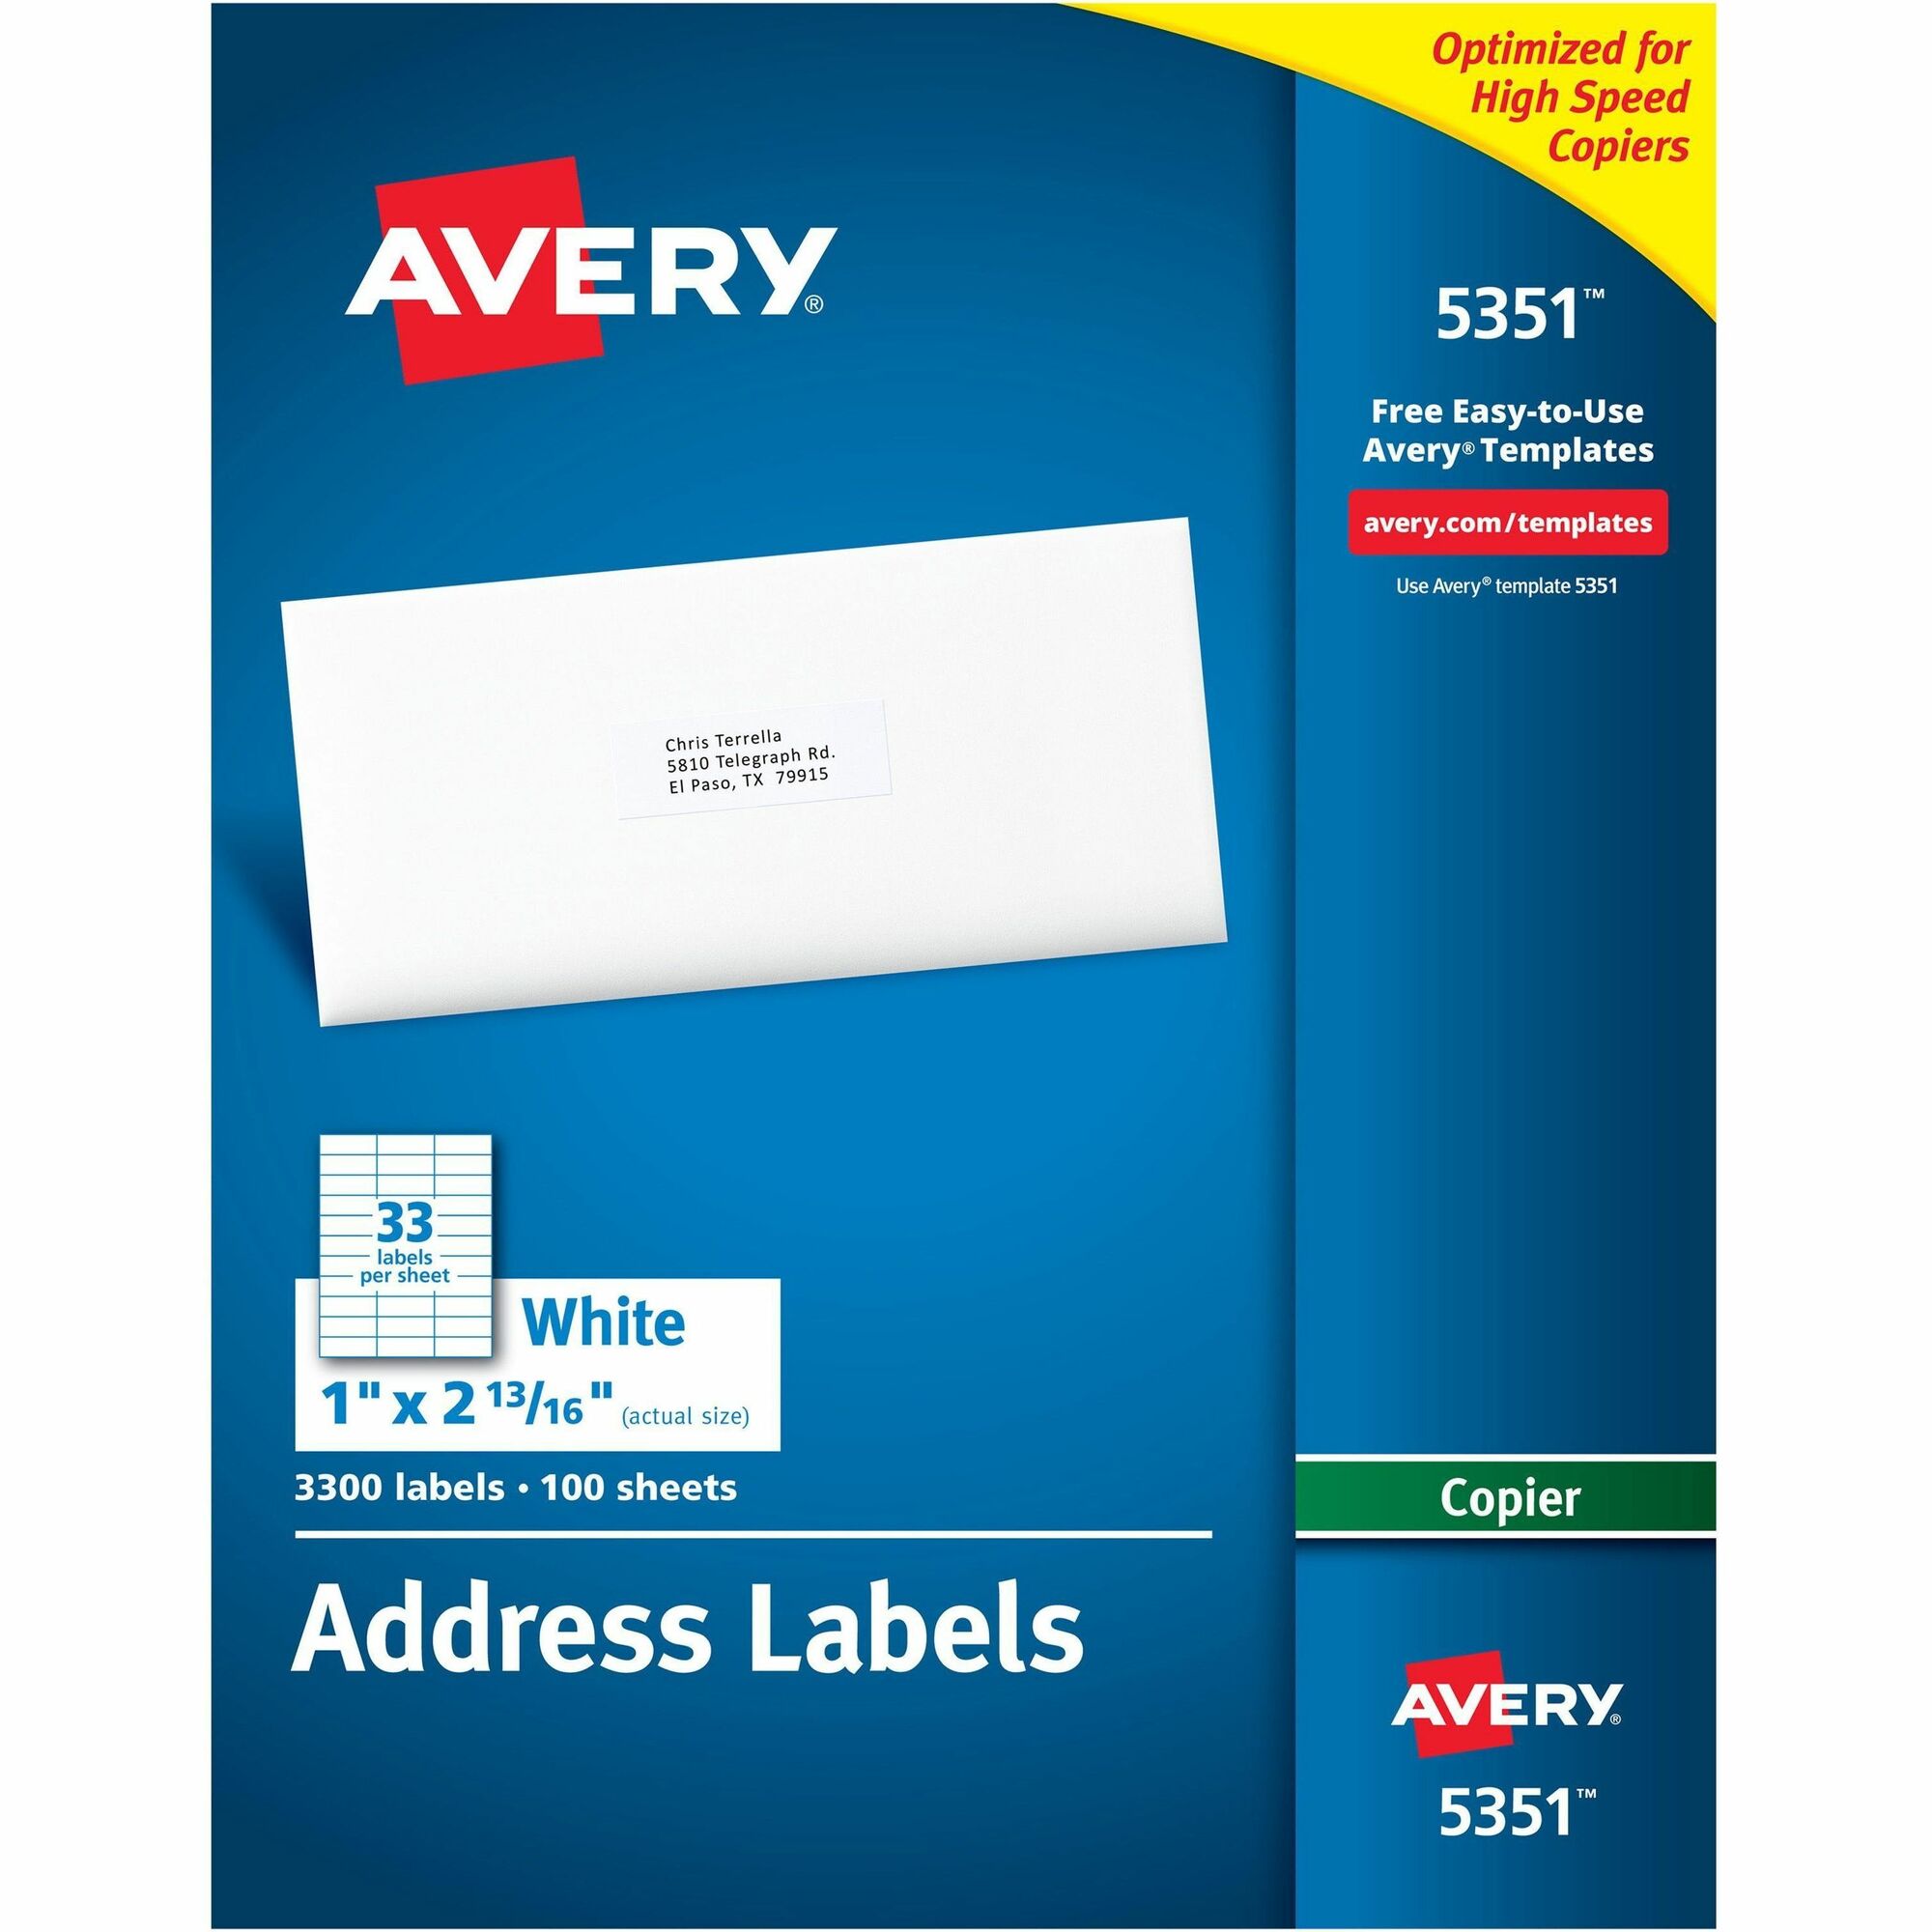 avery-address-labels-5351-template